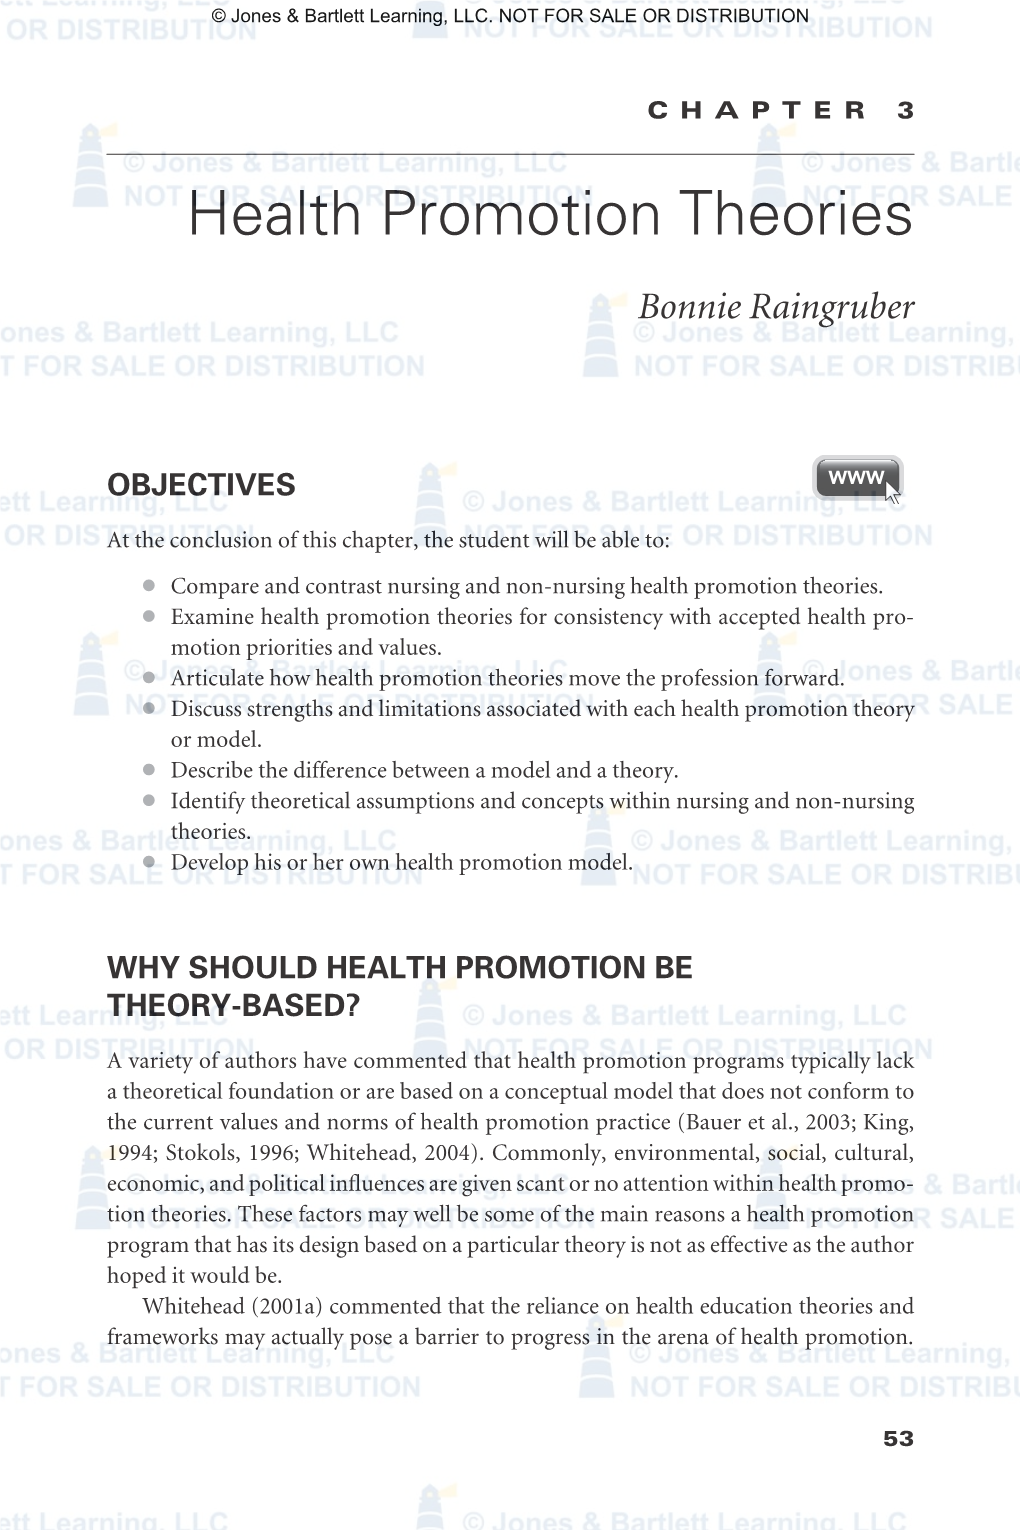 Health Promotion Theories